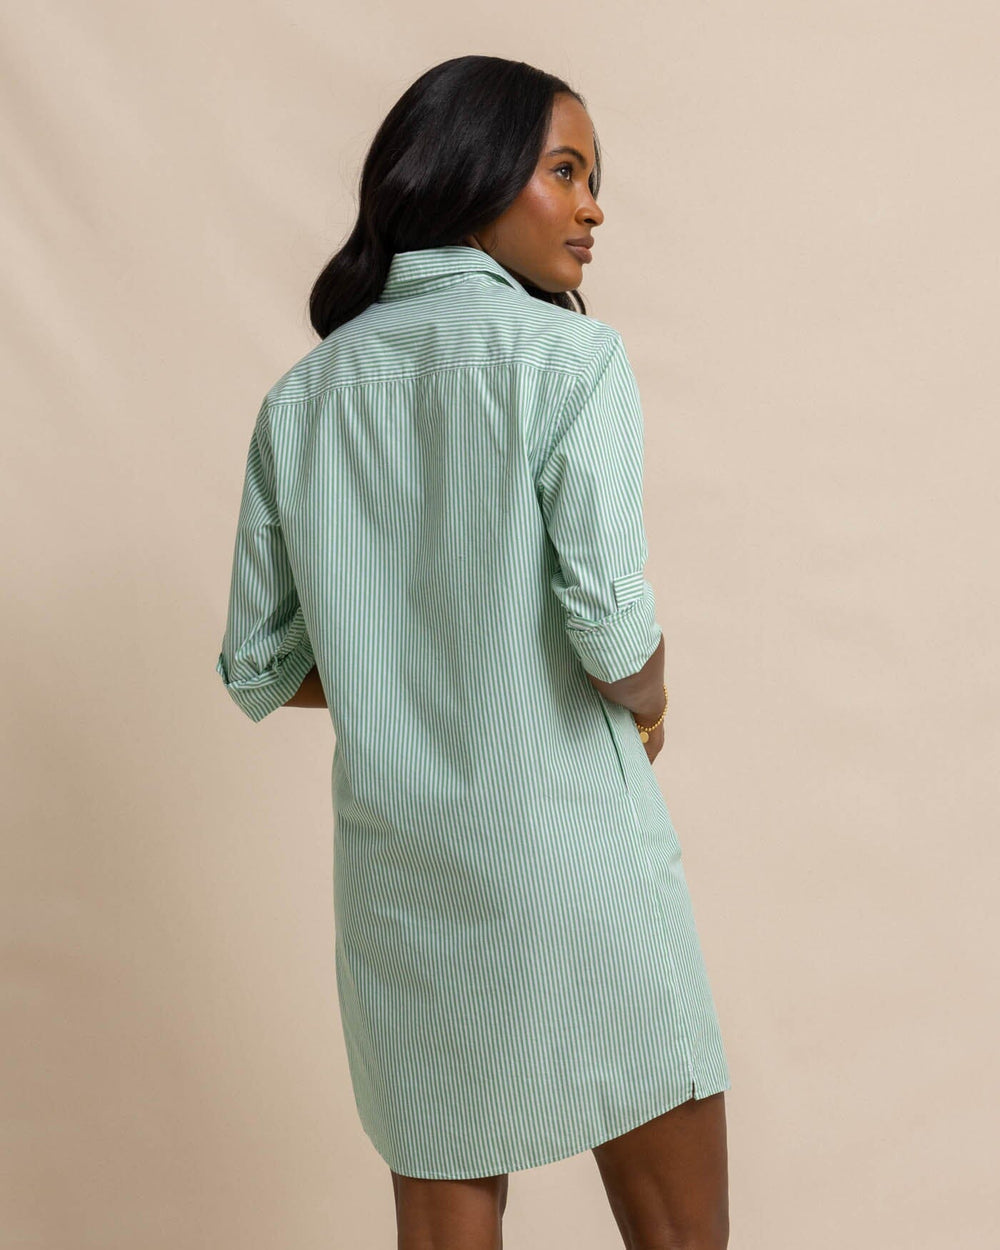 The back view of the Southern Tide Cam Stripe Poplin Dress by Southern Tide - Lawn Green